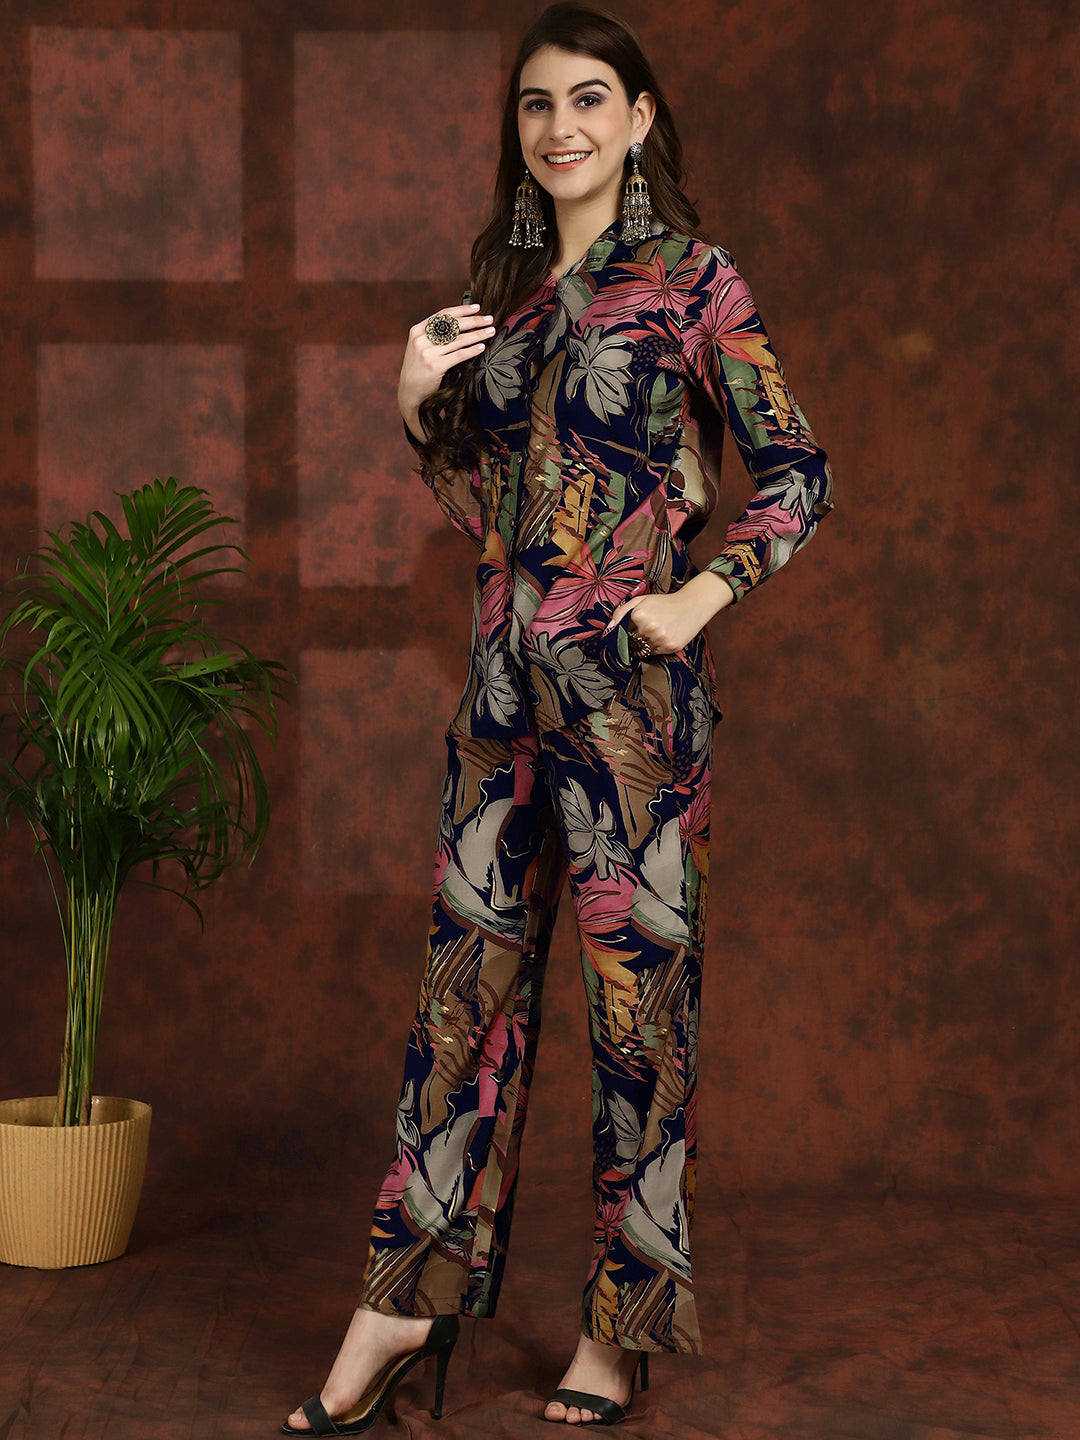 Navy Blue Floral Printed Chanderi Silk Tunic With Trousers Co-ord Set Claura Designs Pvt. Ltd. Cord set Abstract, Chanderi Silk, Co-ord, Co-ord Set, Ethnic, Floral, Navy Blue